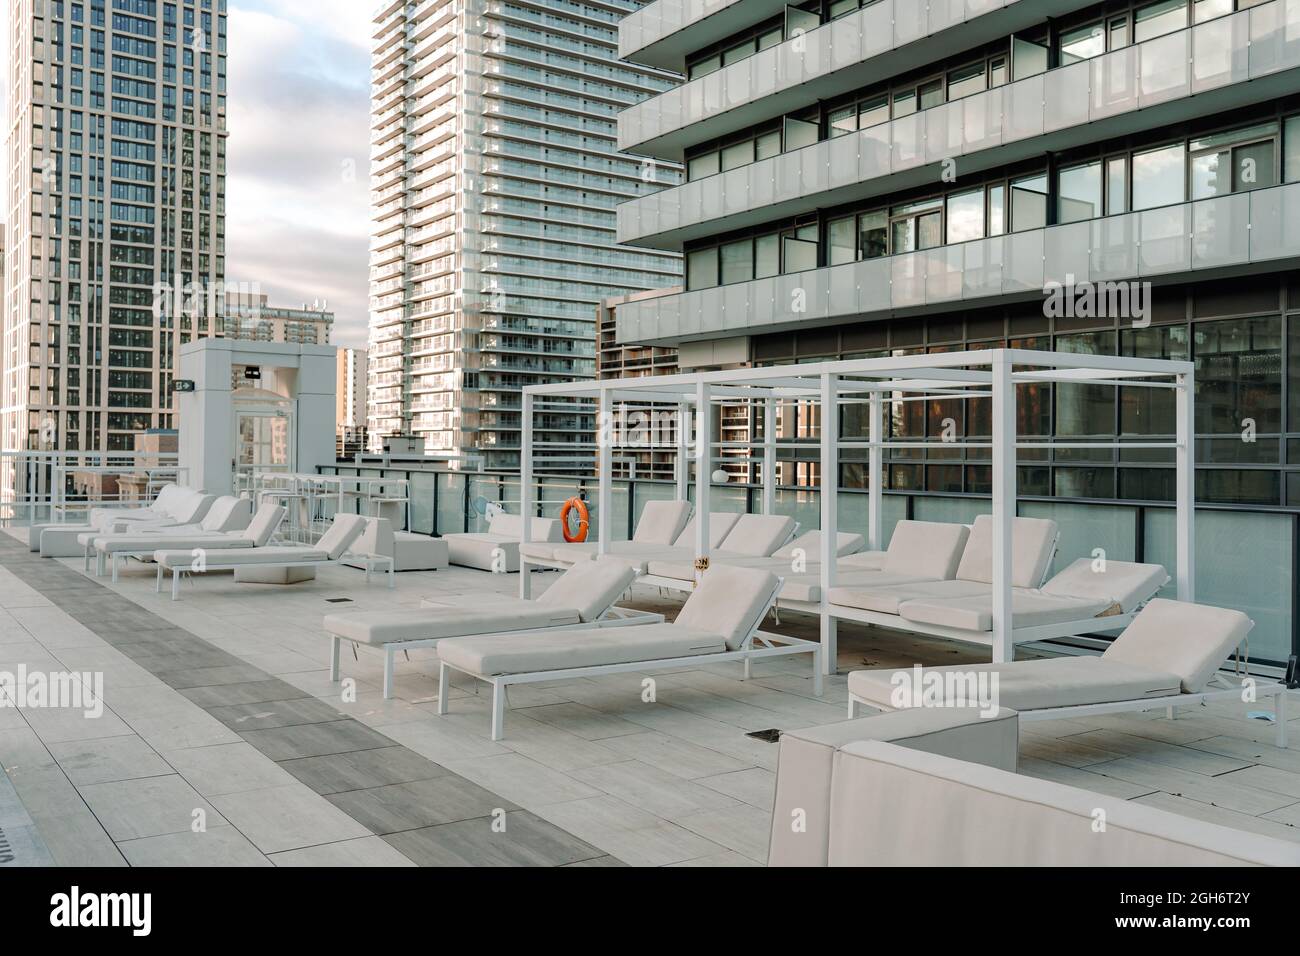 empty sun loungers at a private residential building rooftop Stock Photo